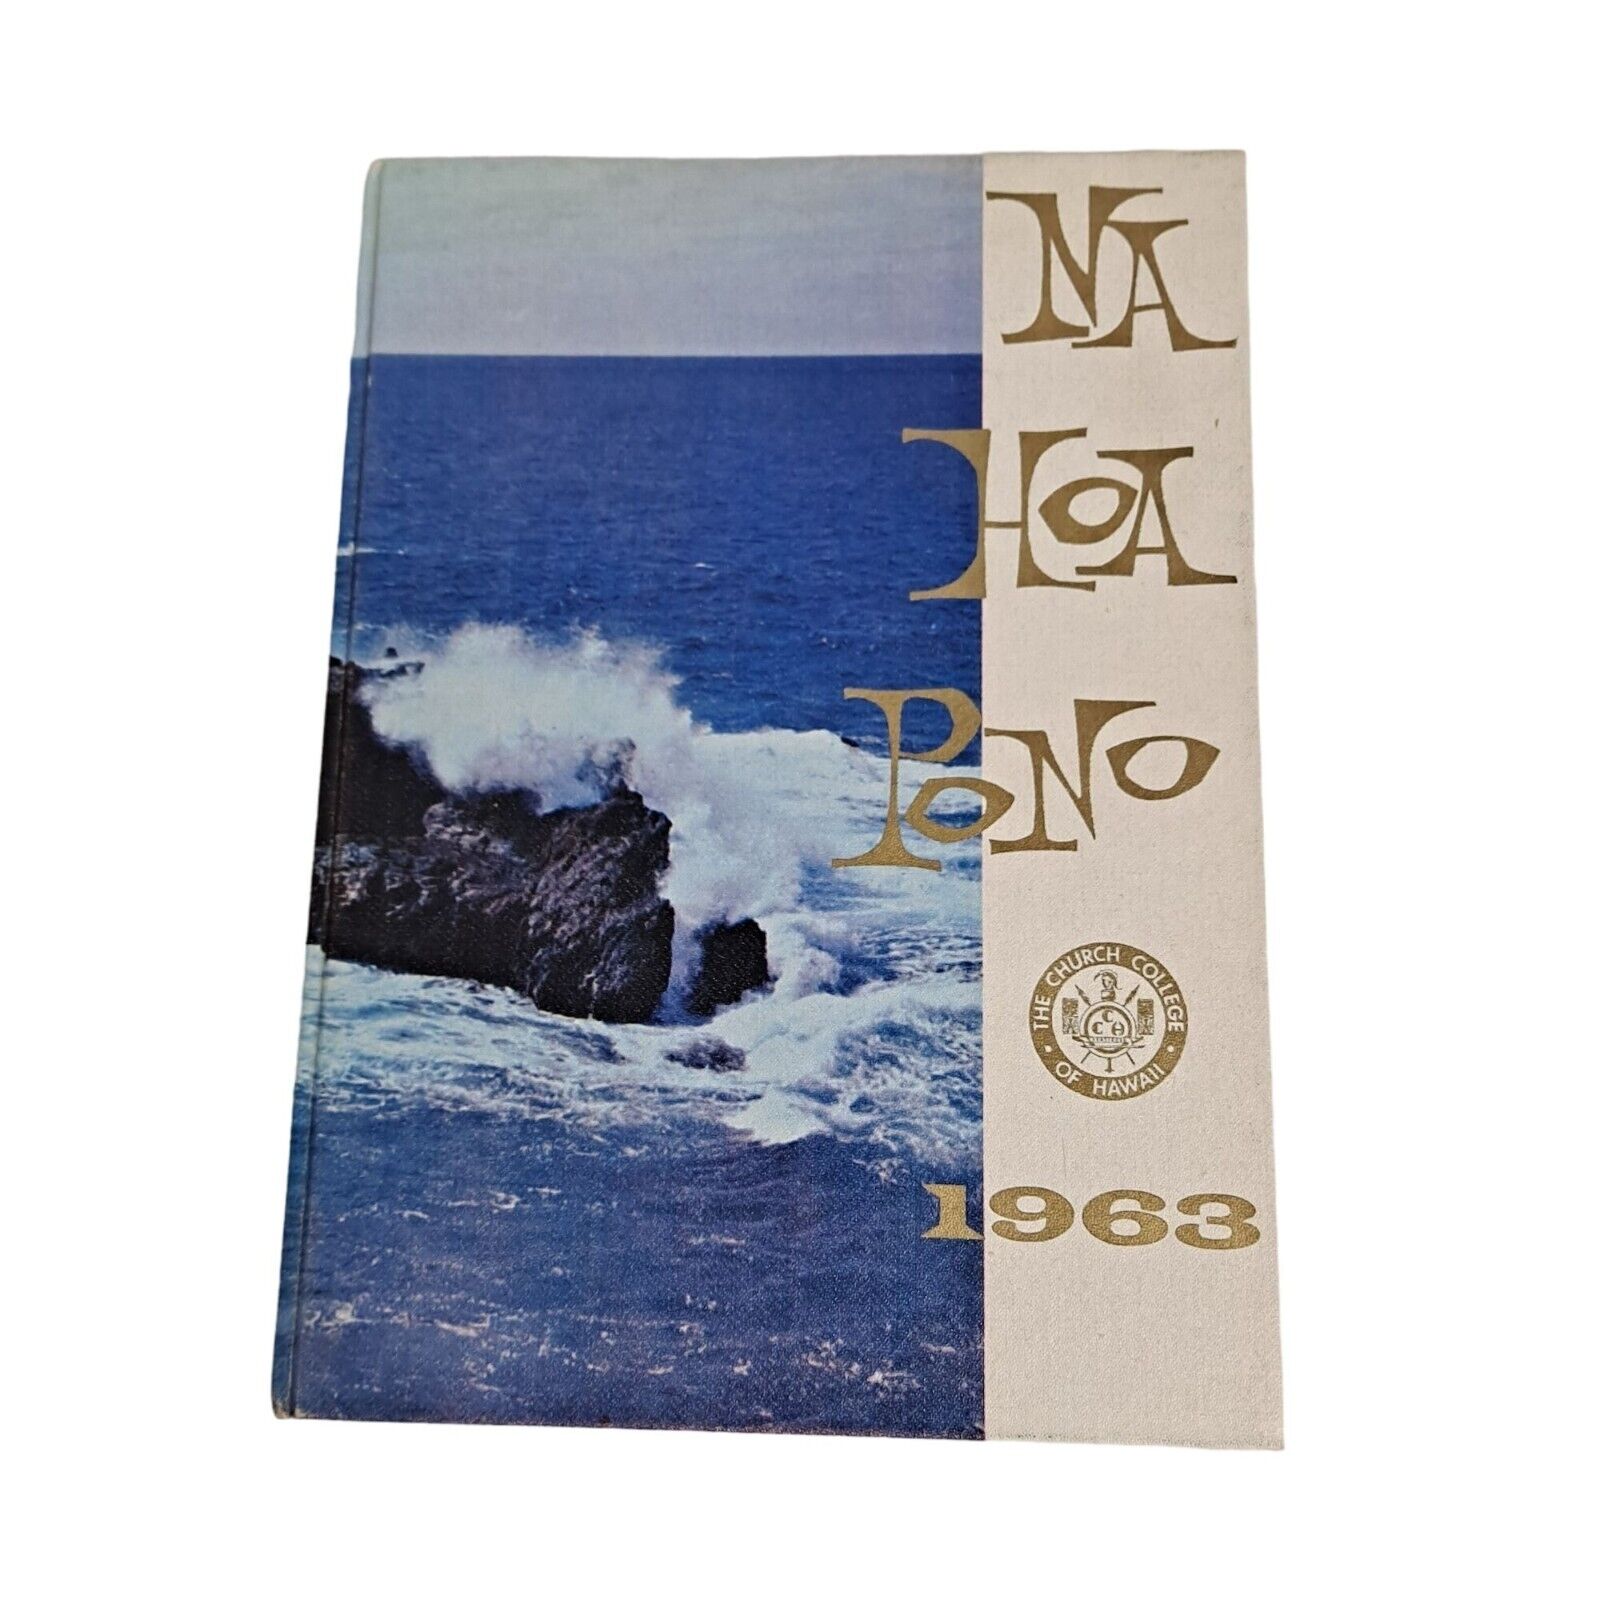 Vintage Na Hoa Pono Yearbook 1963 Church College Hawaii Brigham Young University